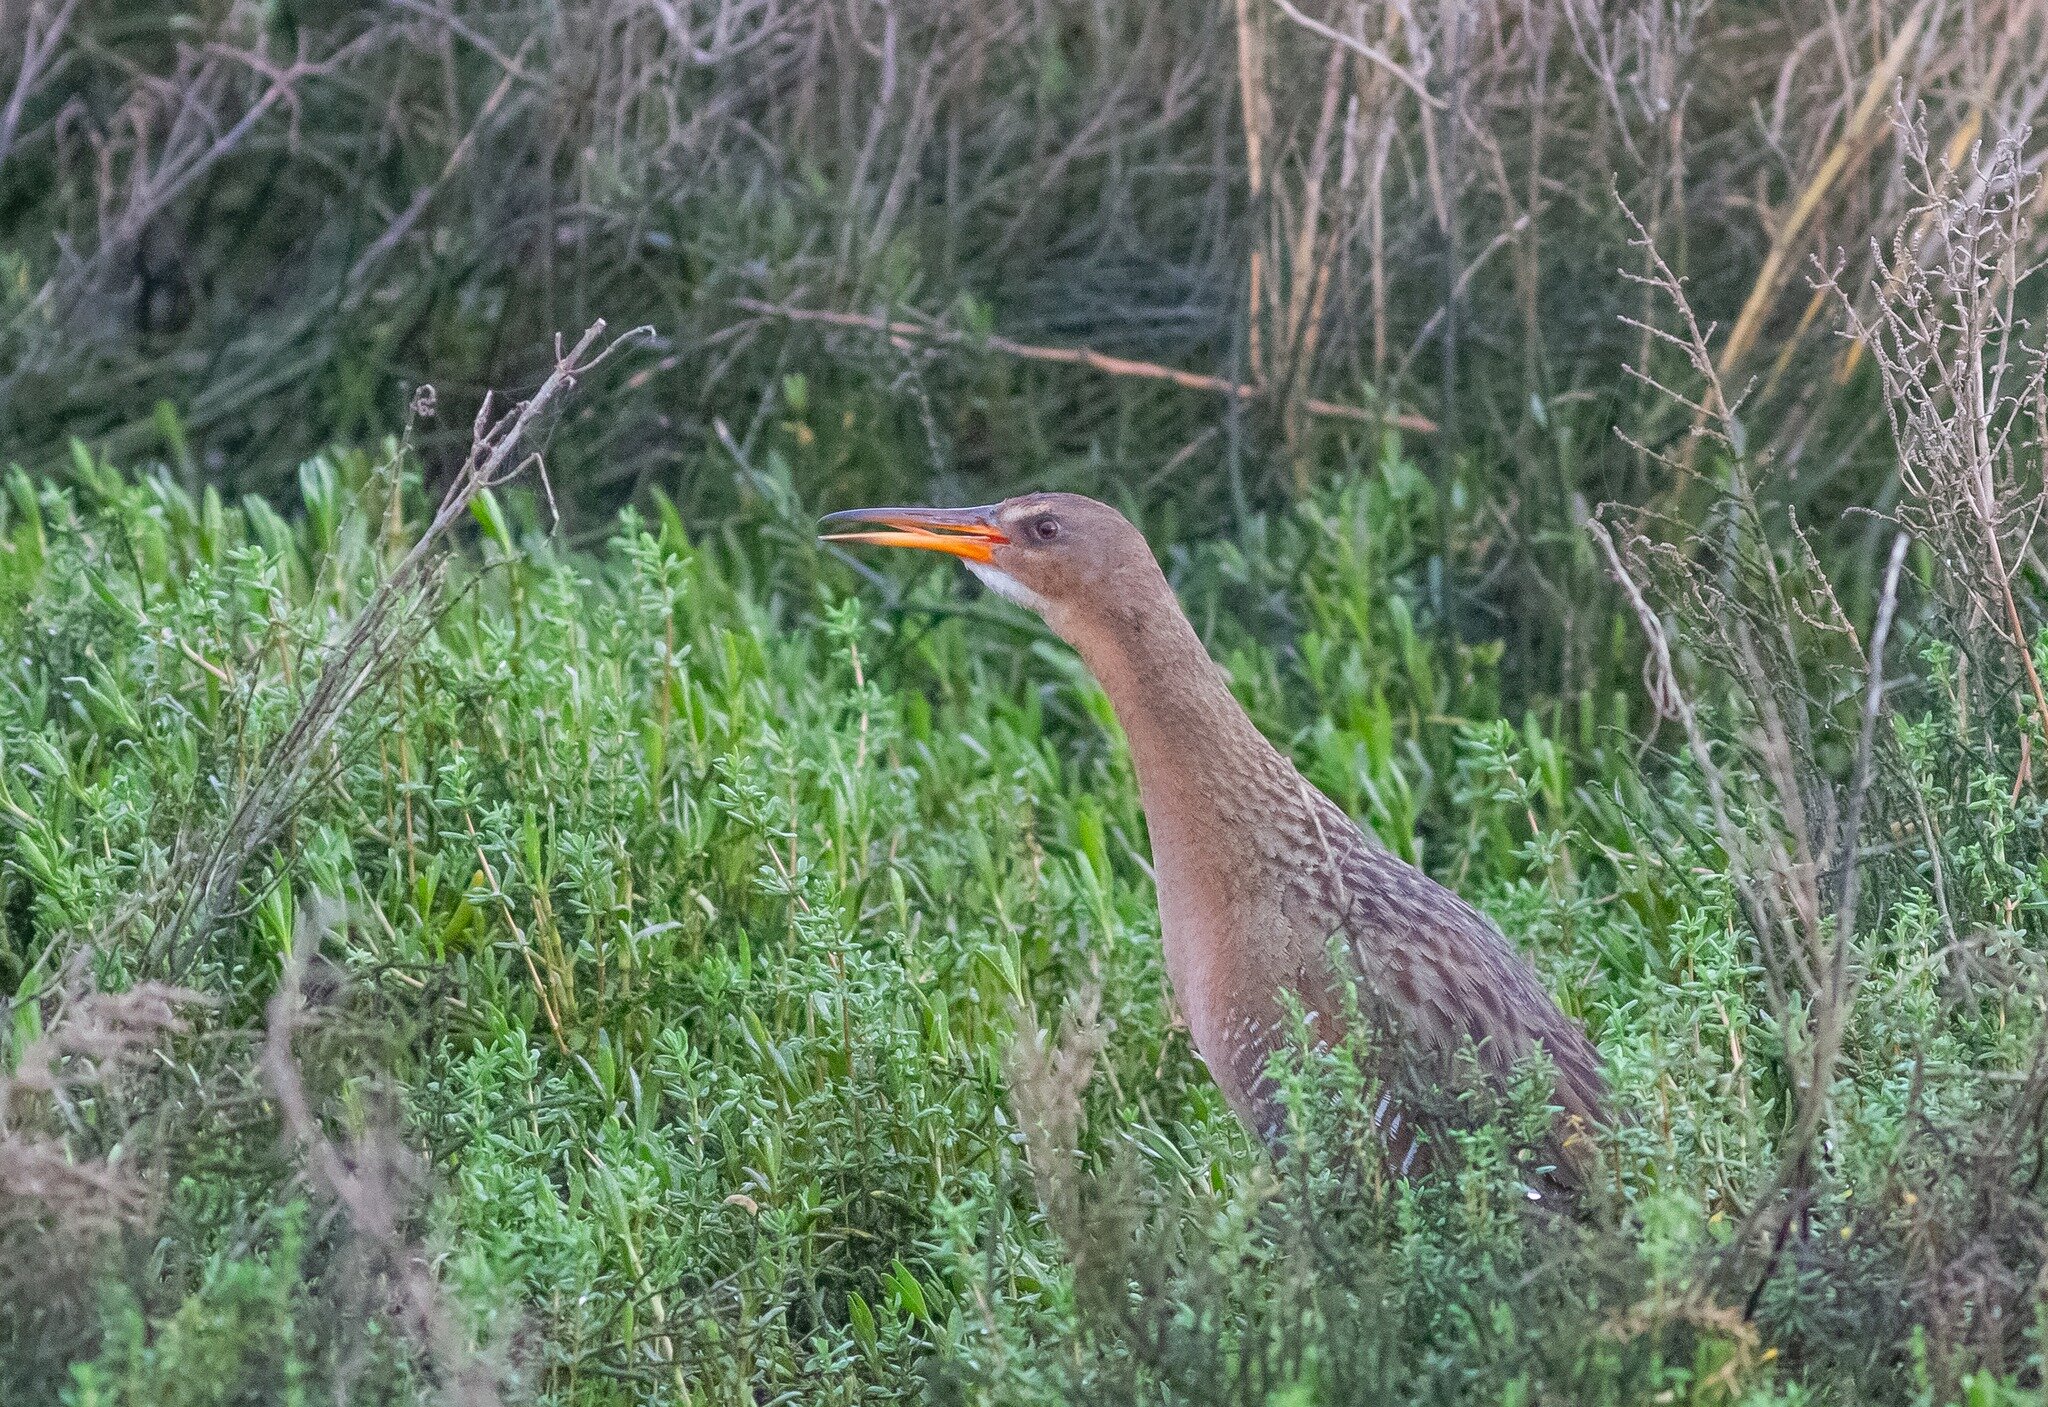 One of the avian highlights of this year's San Diego Bird Festival was Ridgway's Rail. Normally secretive and difficult to find, our sponsored field trips to the Tijuana Slough NWR were timed to match high tide, which can bring them out of dense cove